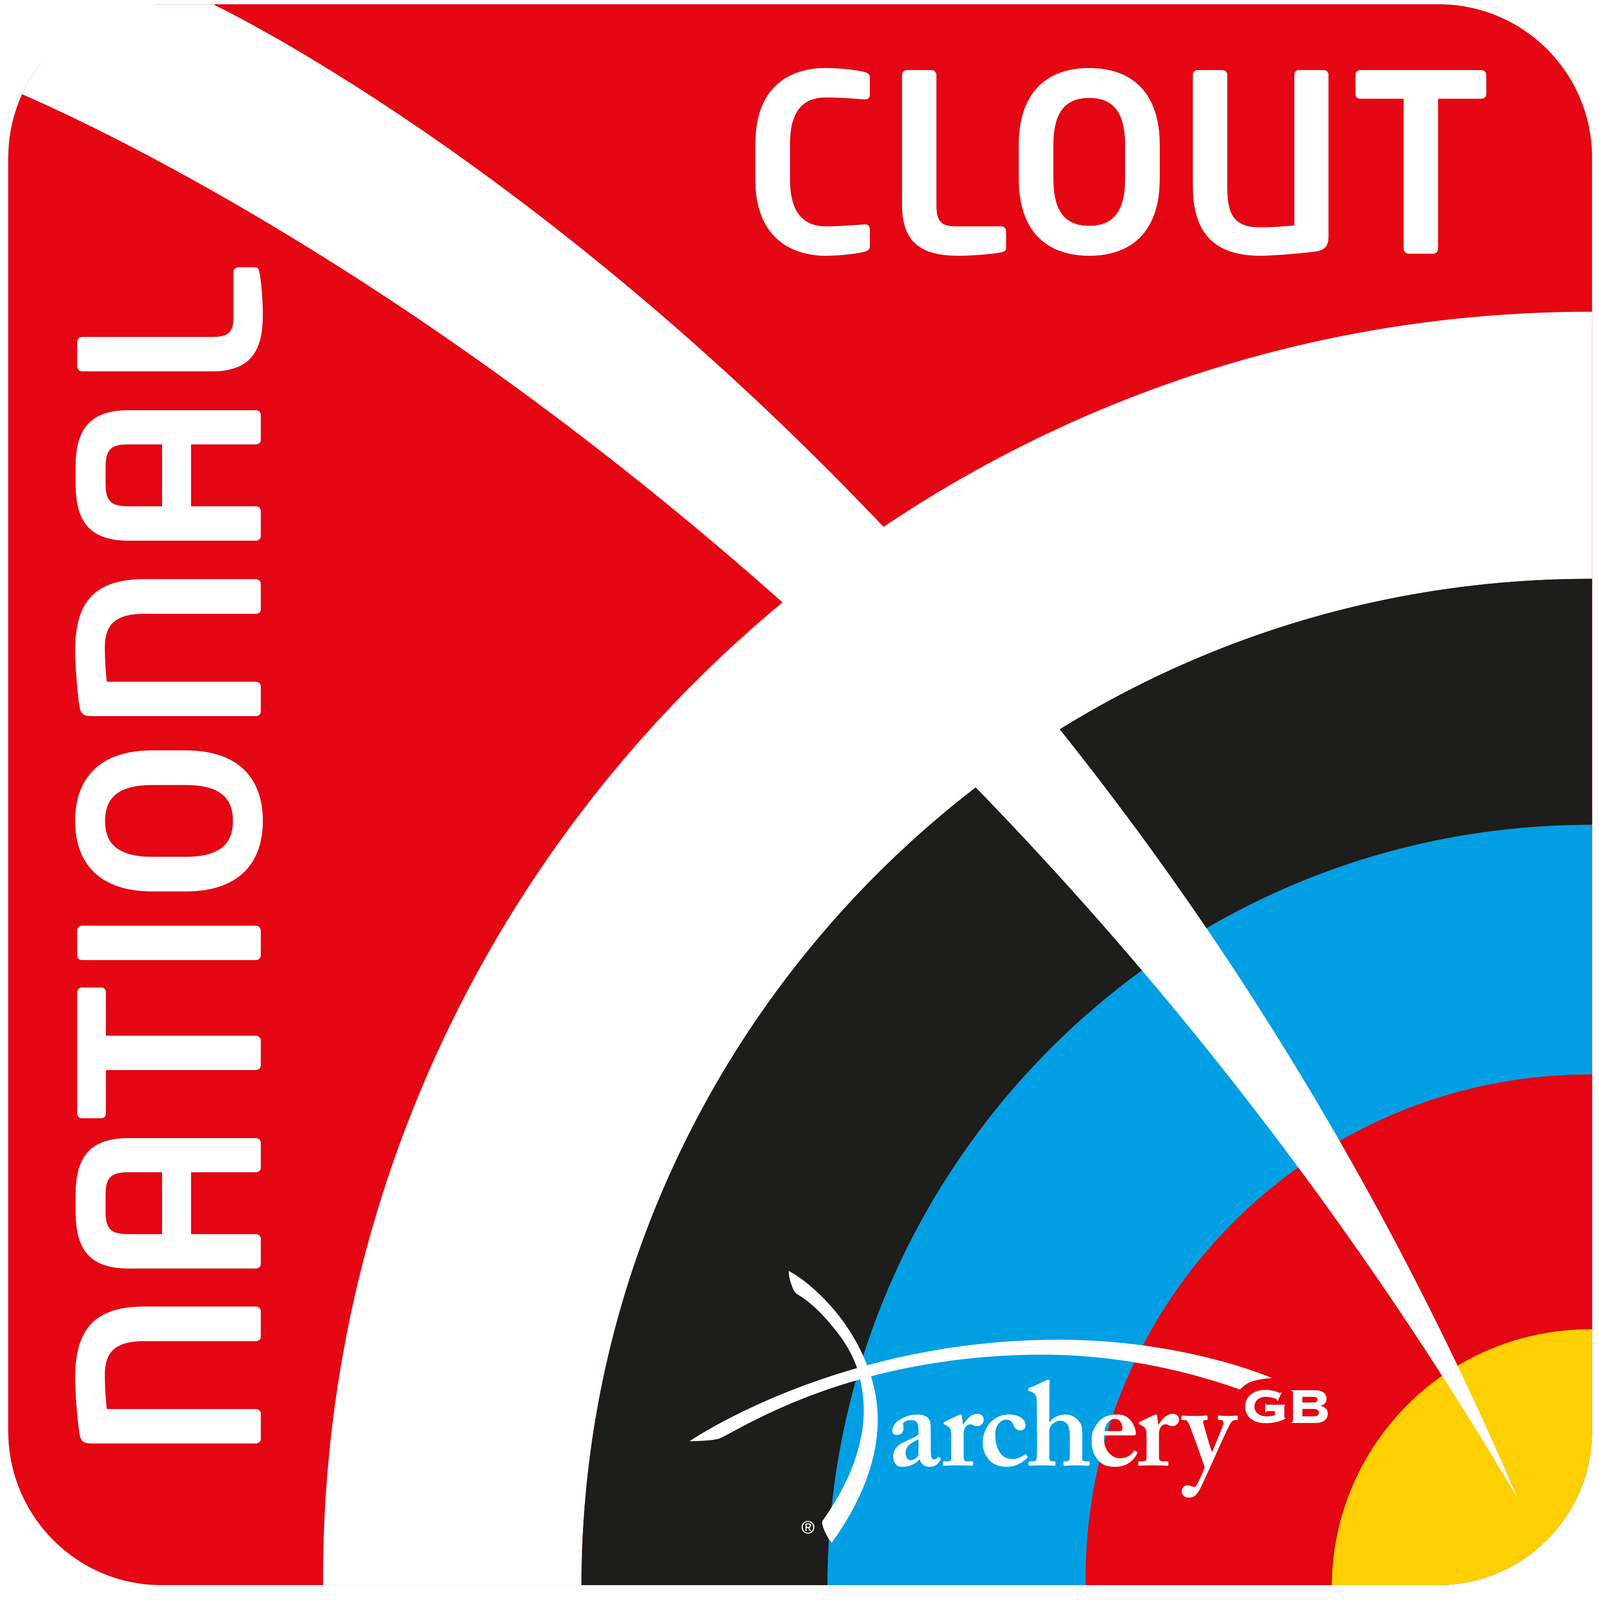 Archery GB National Clout Championships logo